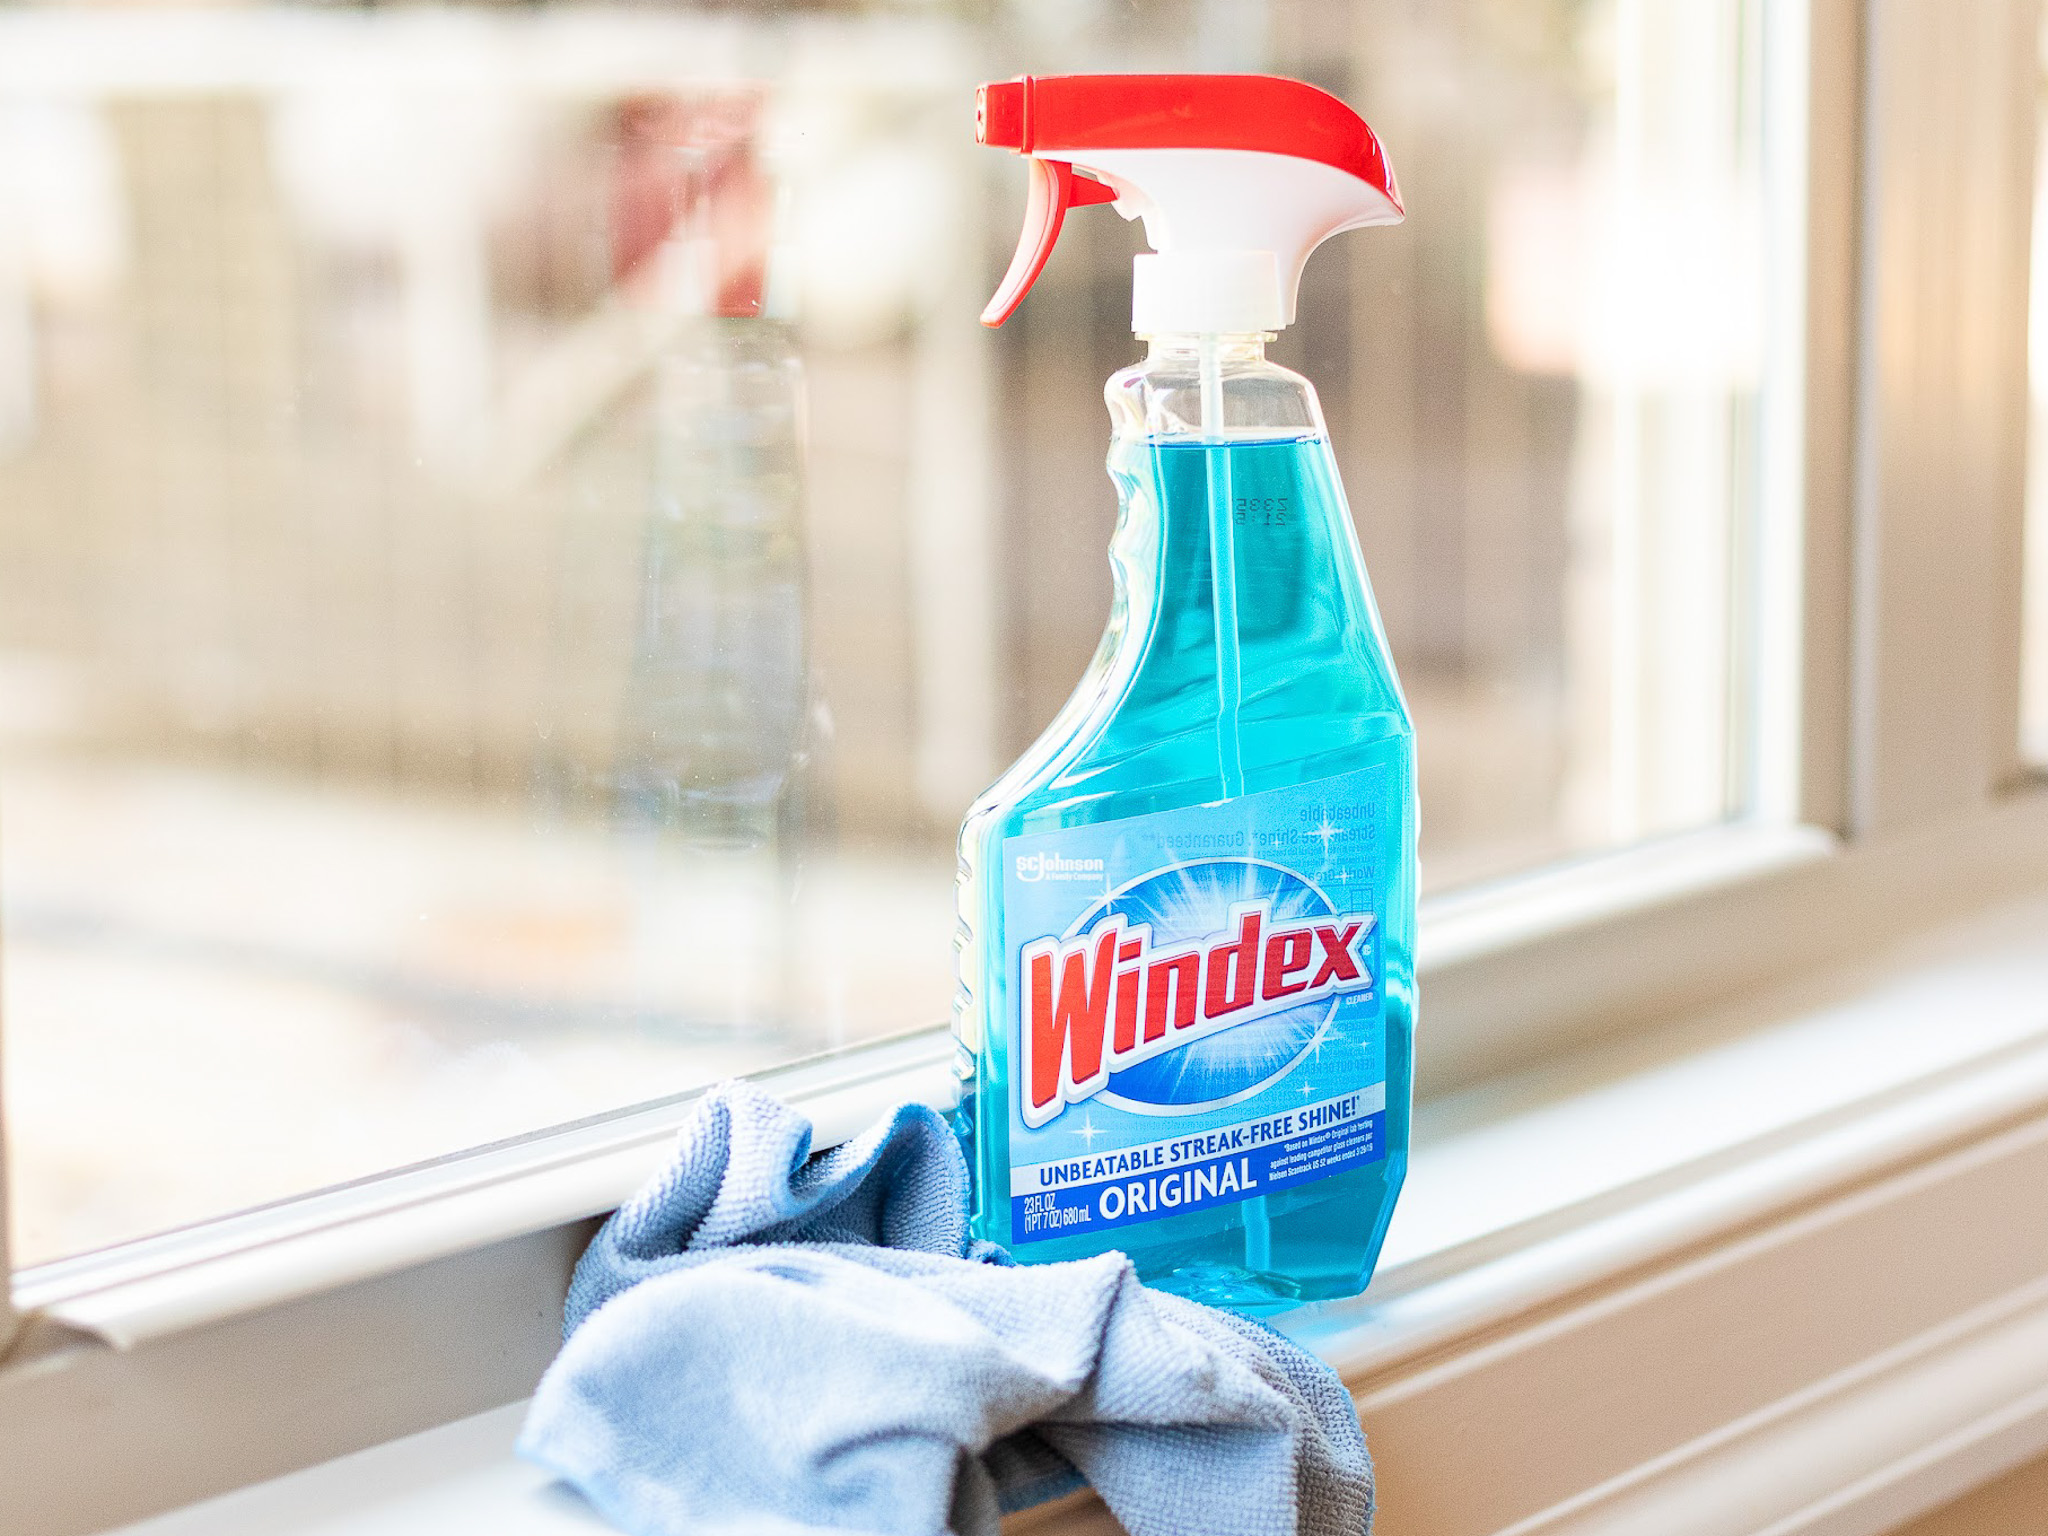 Glass Plus Cleaners $0.25 each at Publix! - AddictedToSaving.com